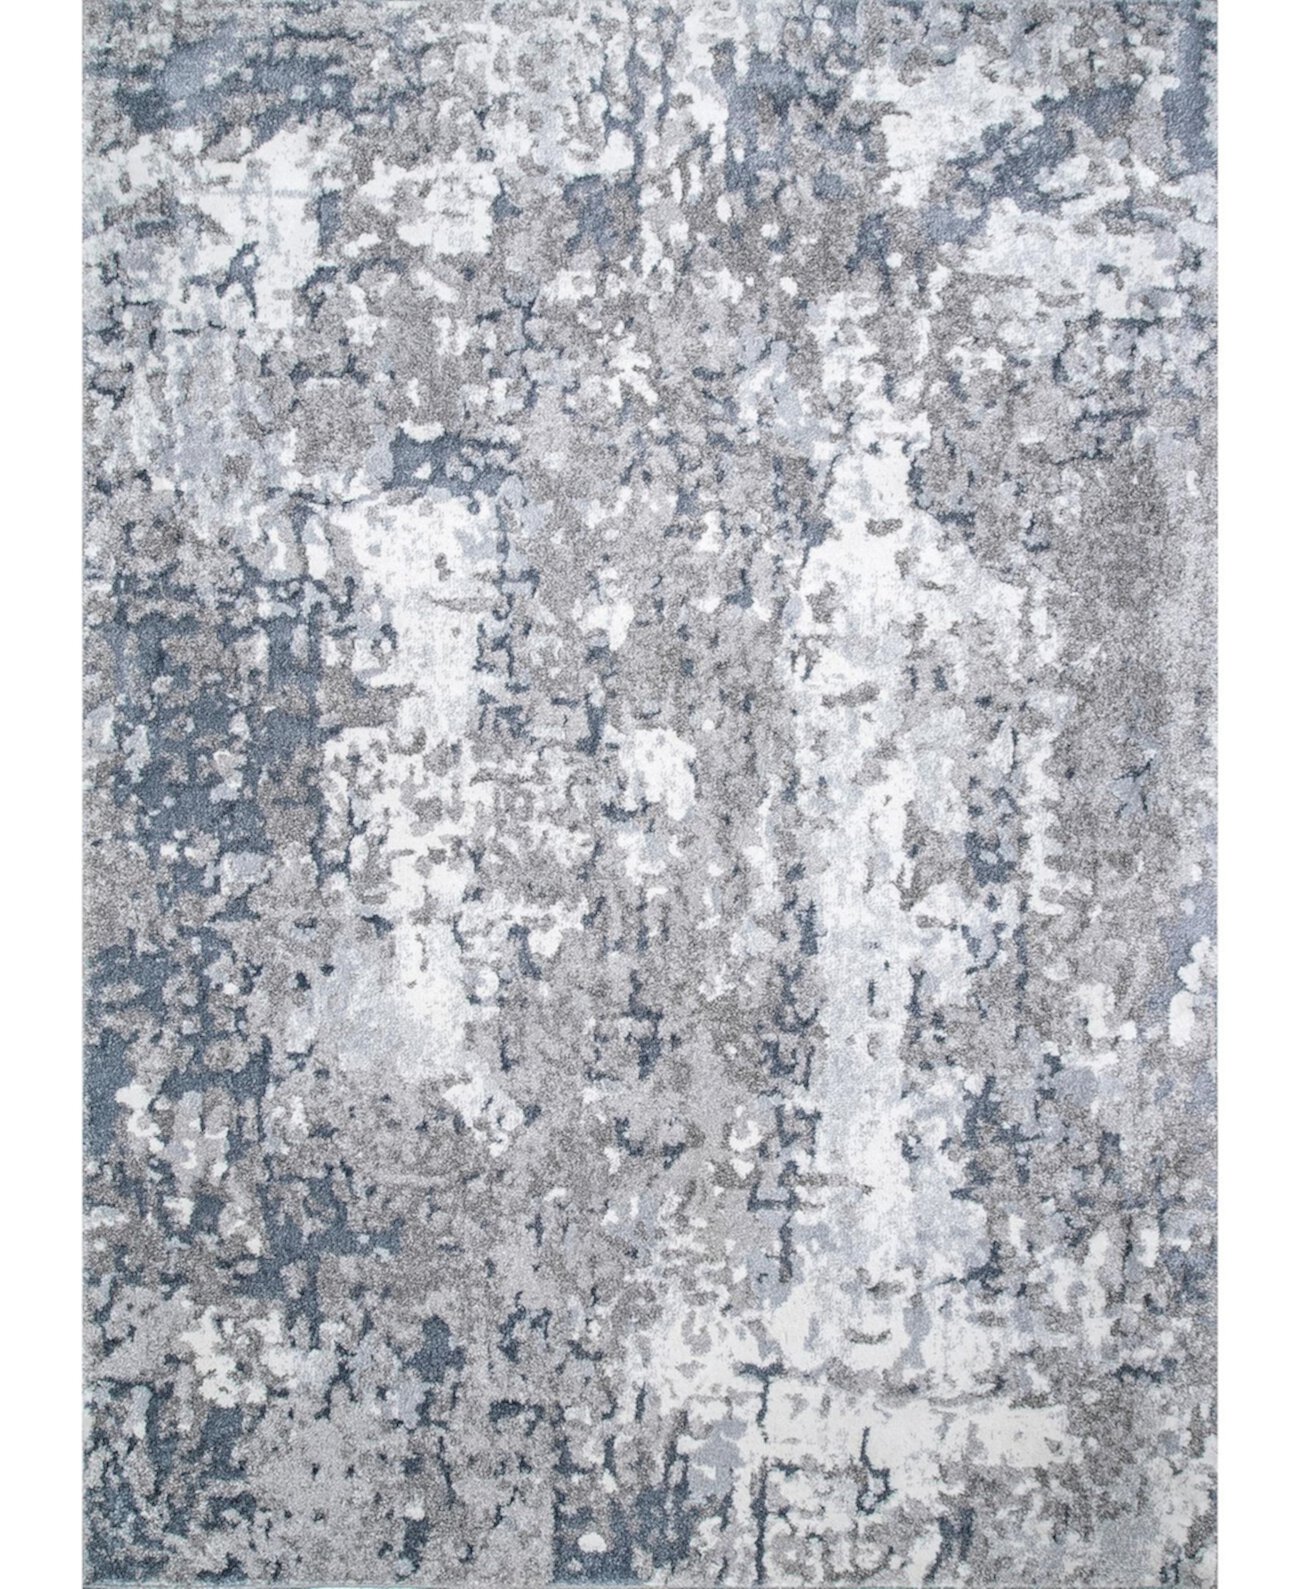 Mitchell Contemporary Abstract Silver 8' x 10' Area Rug NuLOOM